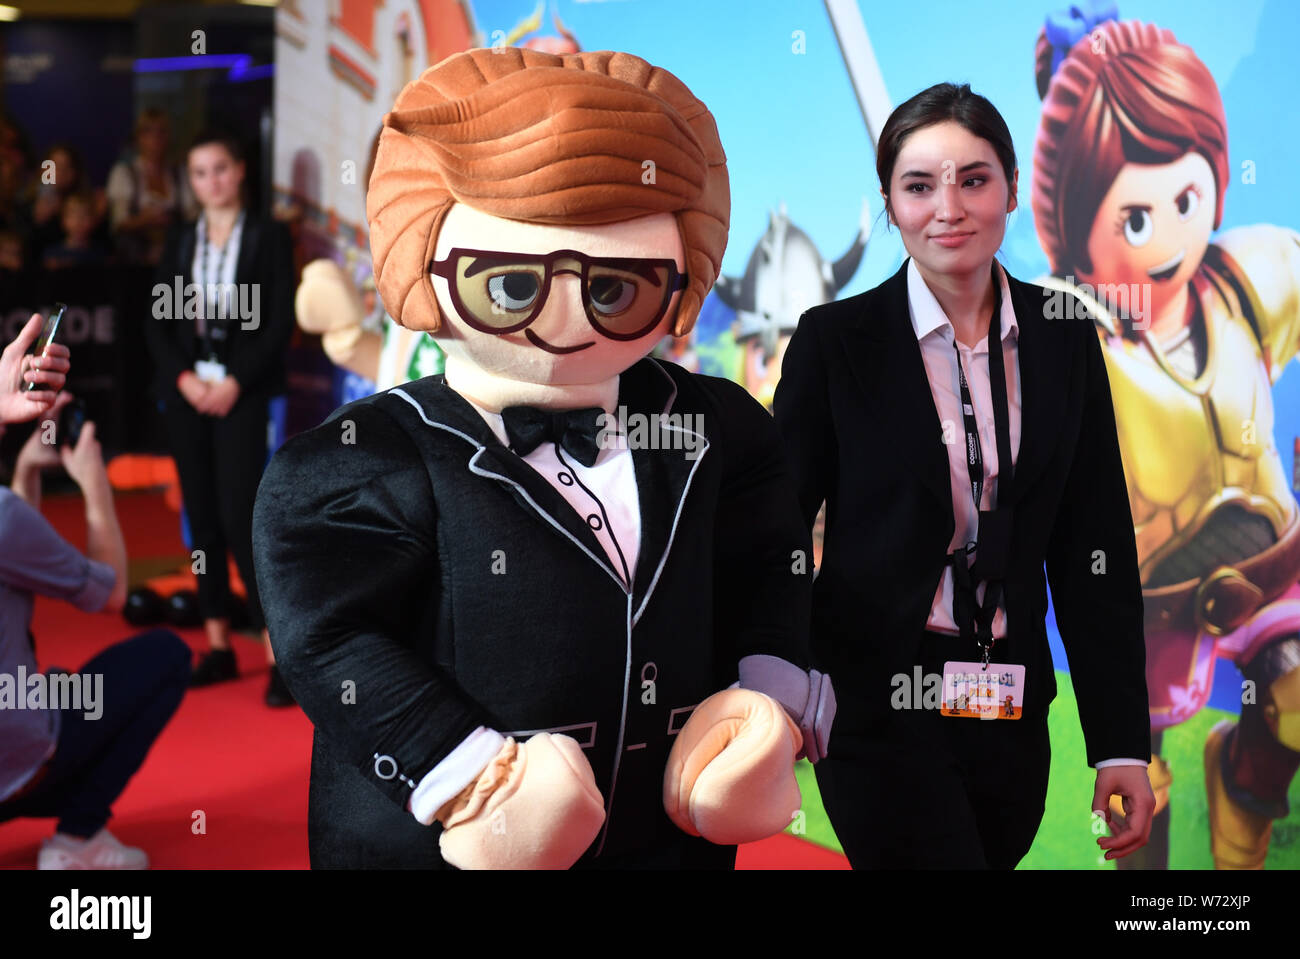 Munich, Germany. 04th Aug, 2019. A Living Playmobil character is standing  on the red carpet at the film premiere "Playmobil - the film" in the  Mathäser cinema. The animated film will be